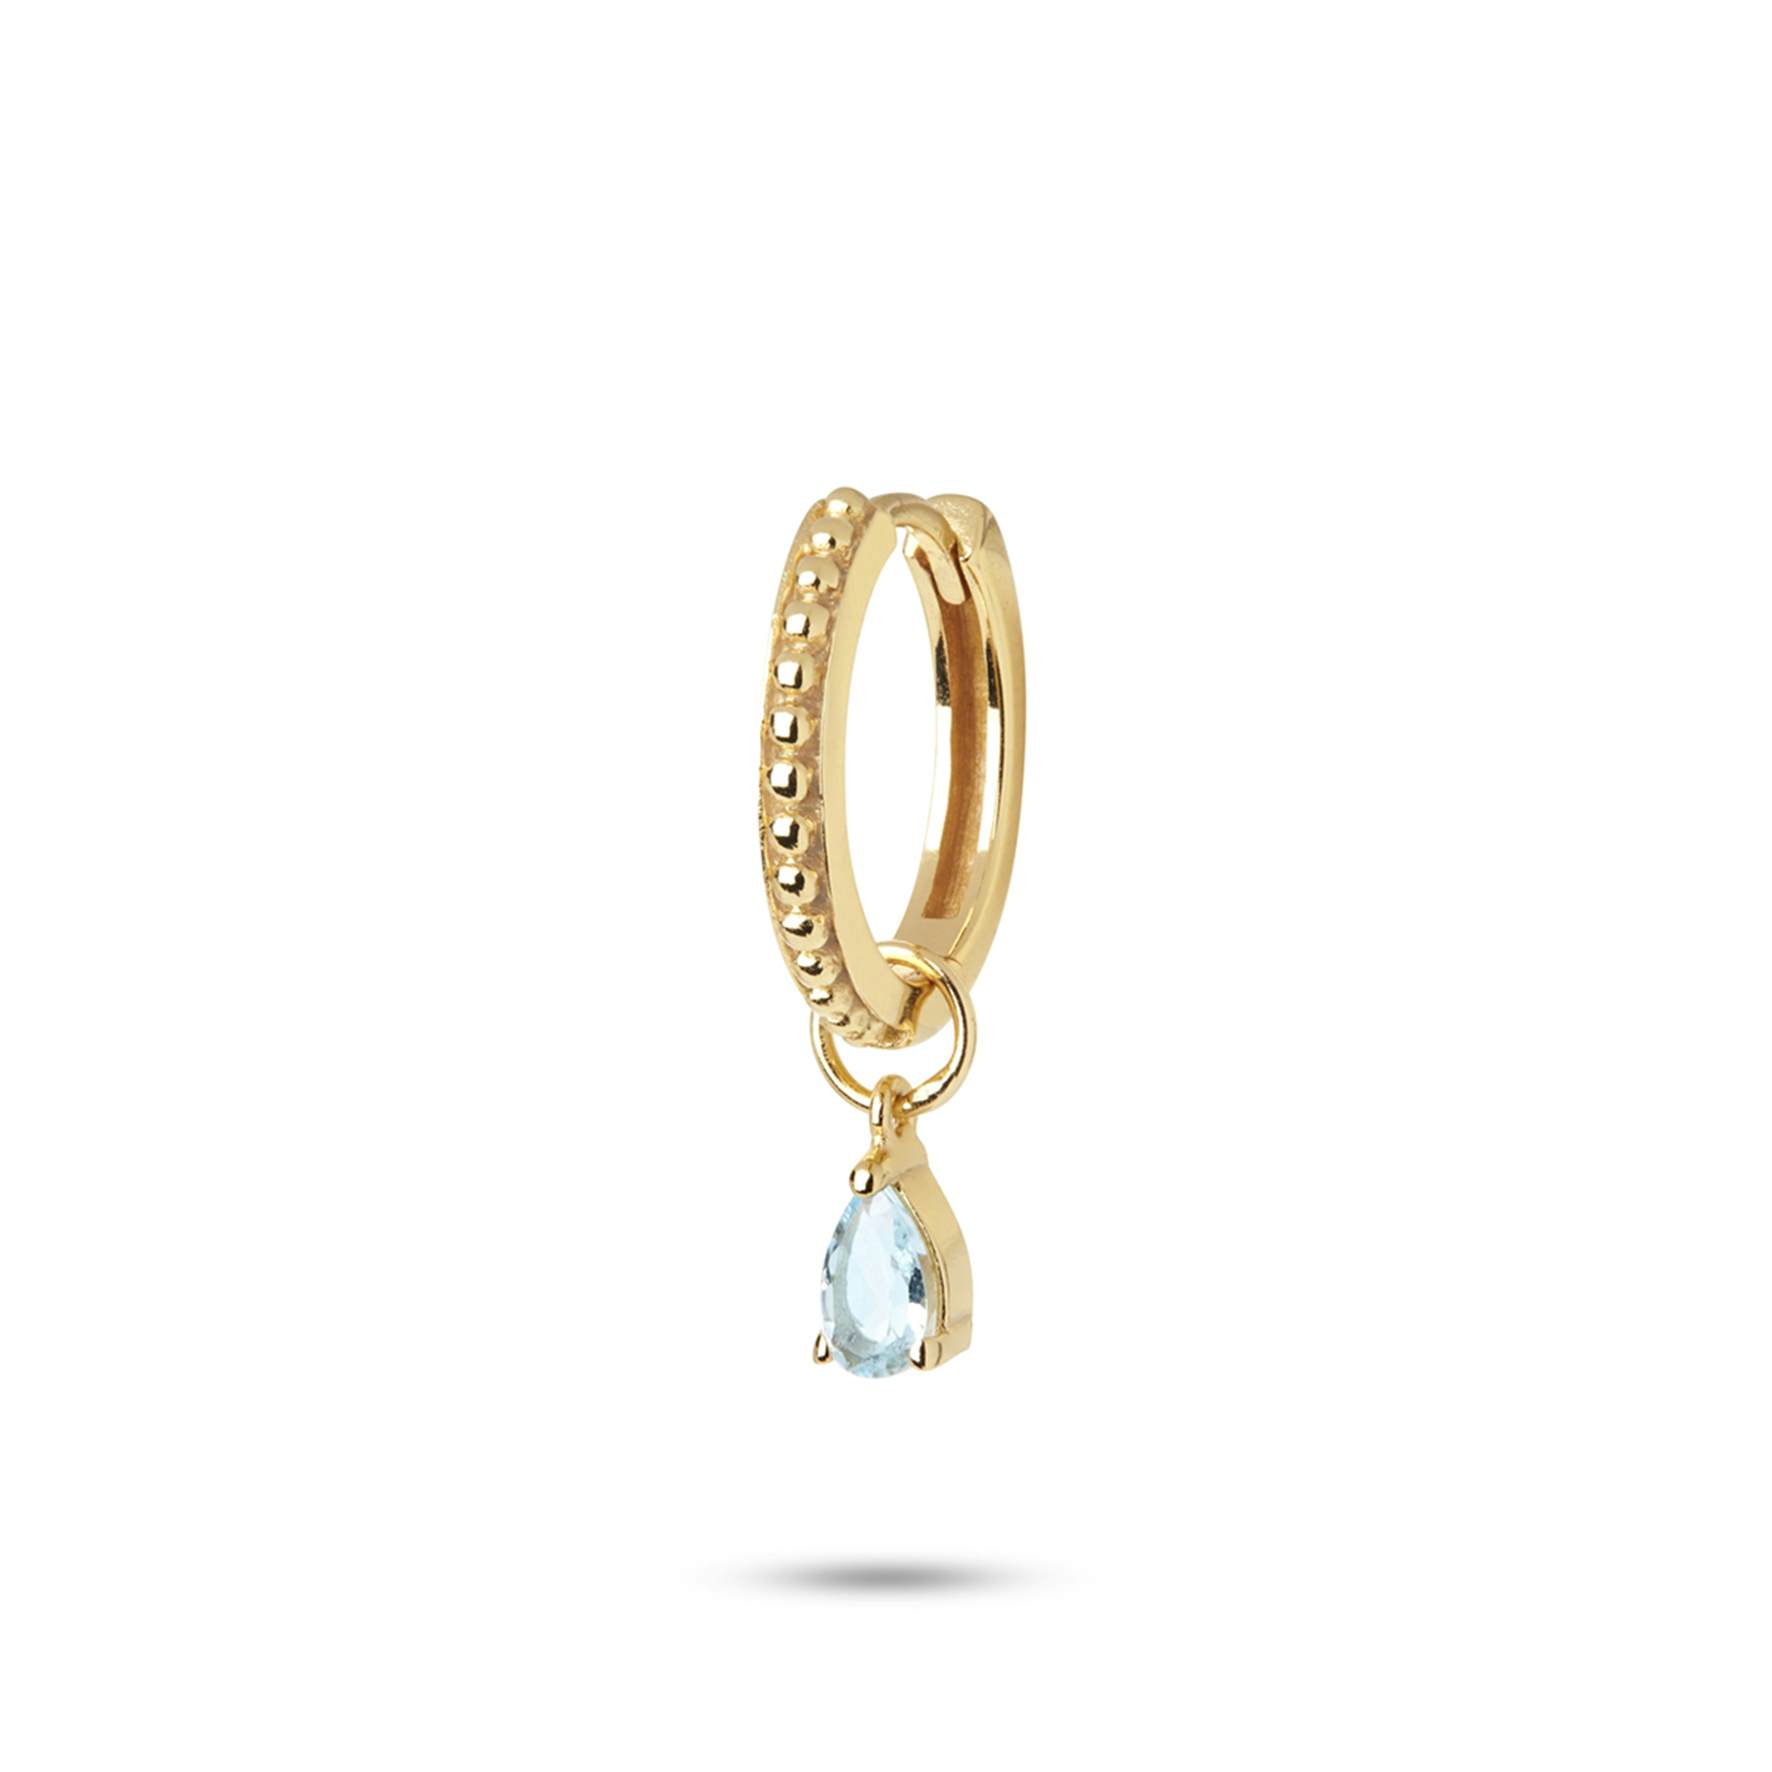 Gem Candy Earring Aqua from Carré in Goldplated-Silver Sterling 925